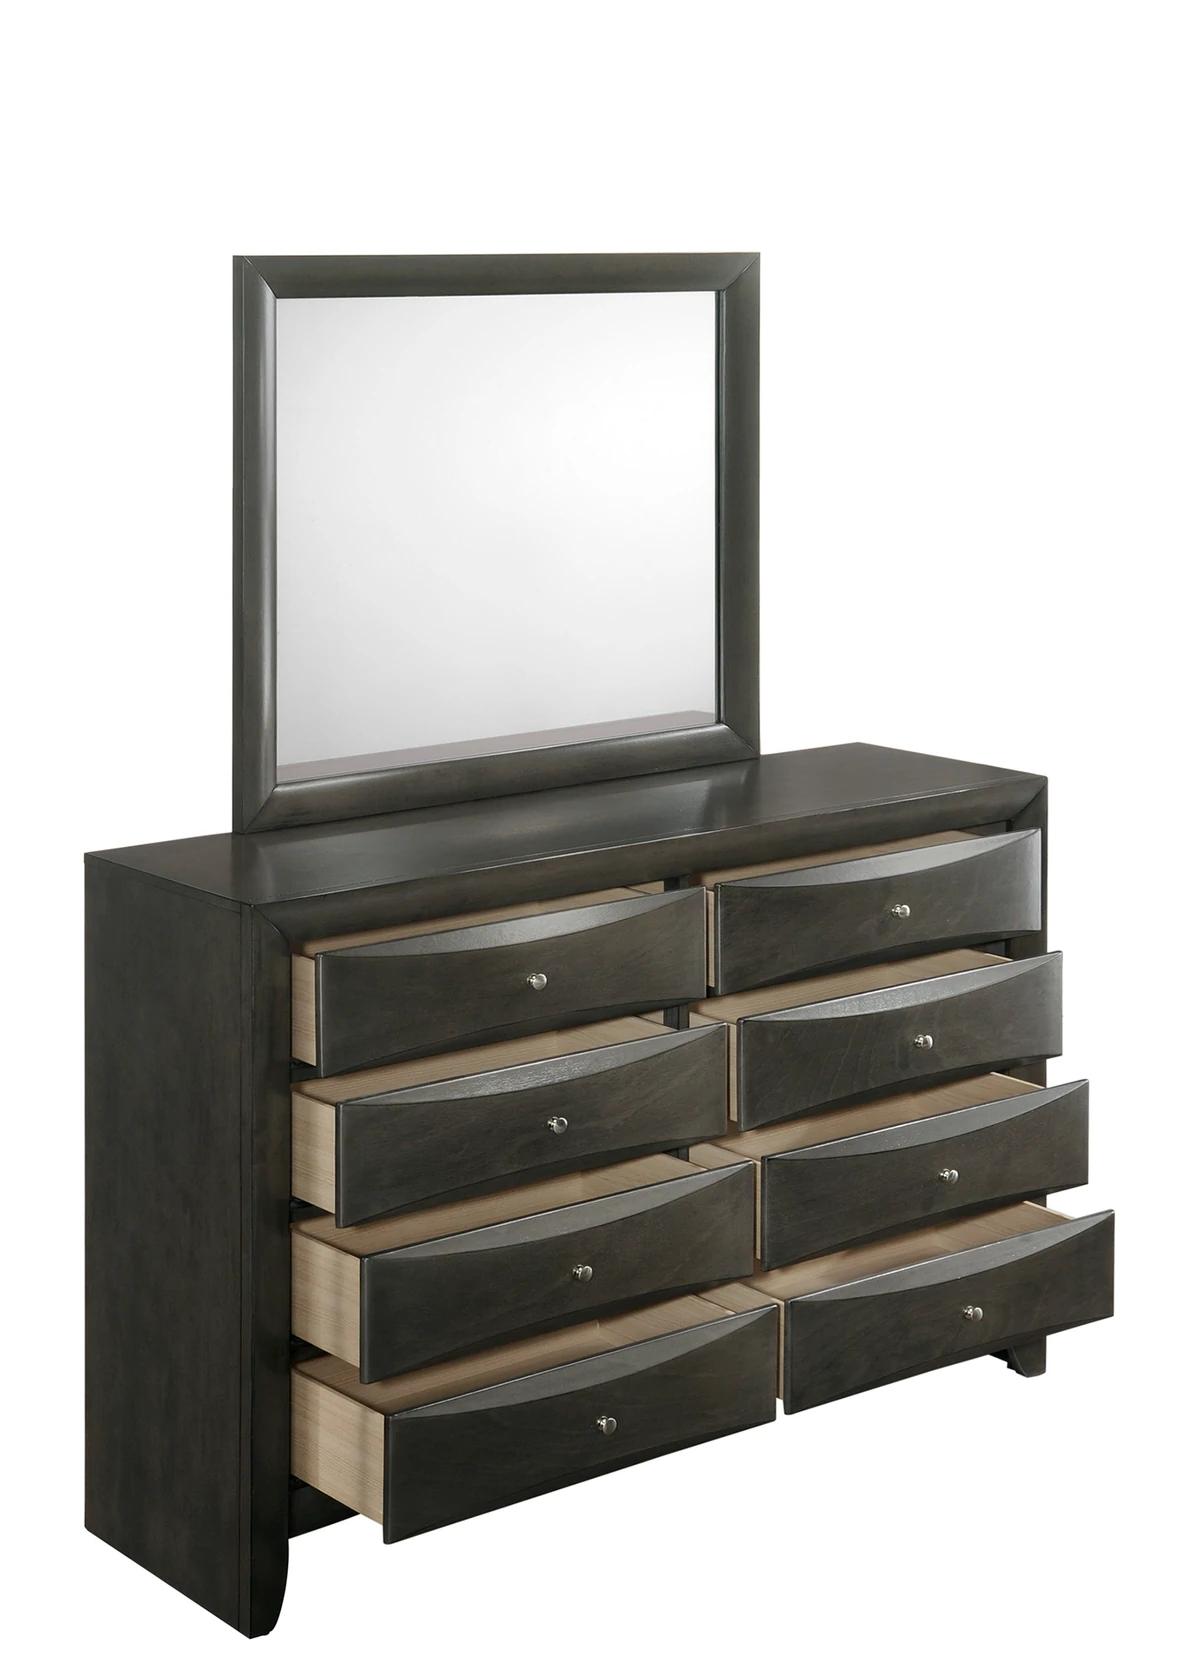 Gray Storage Bedroom Set By Crown Mark Emily B4275 Q Bed 6pcs Buy Online On Ny Furniture Outlet 